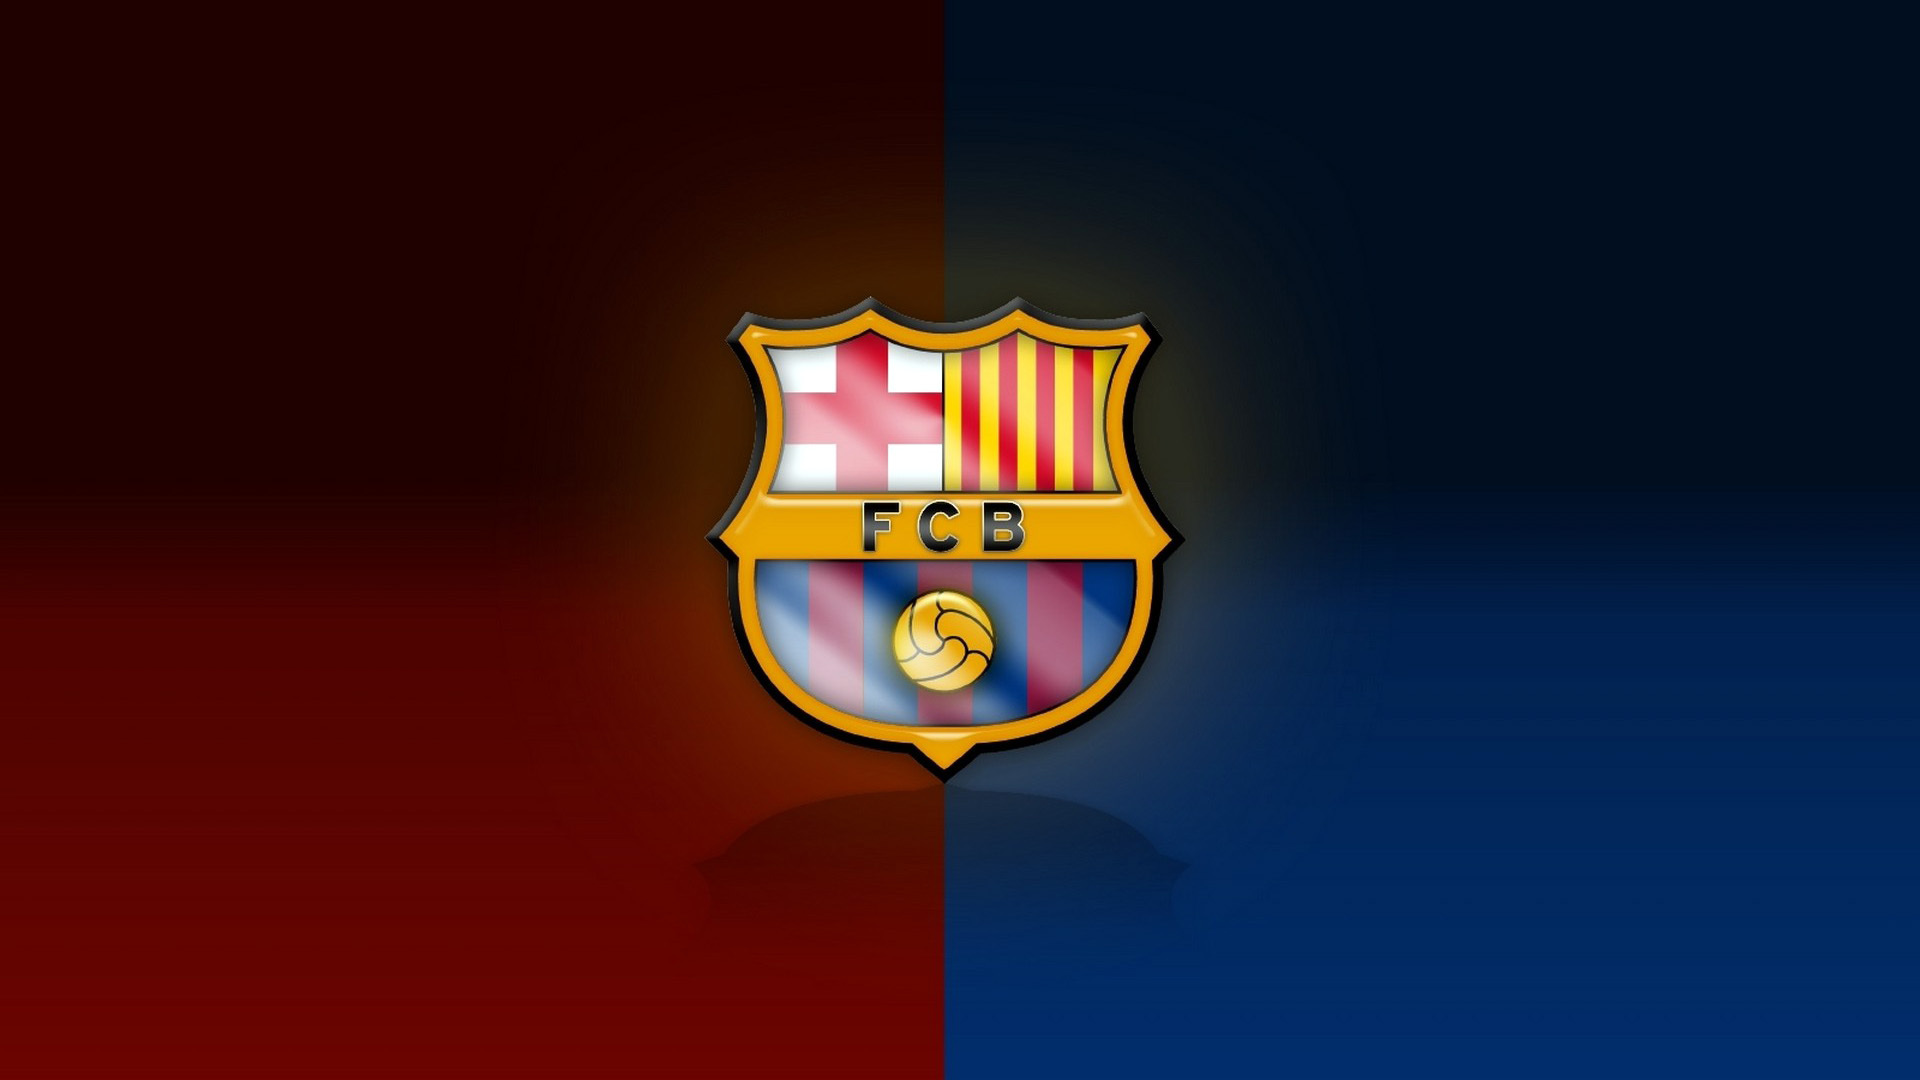 Fc Barcelona Wallpaper Image Photos Pictures Background